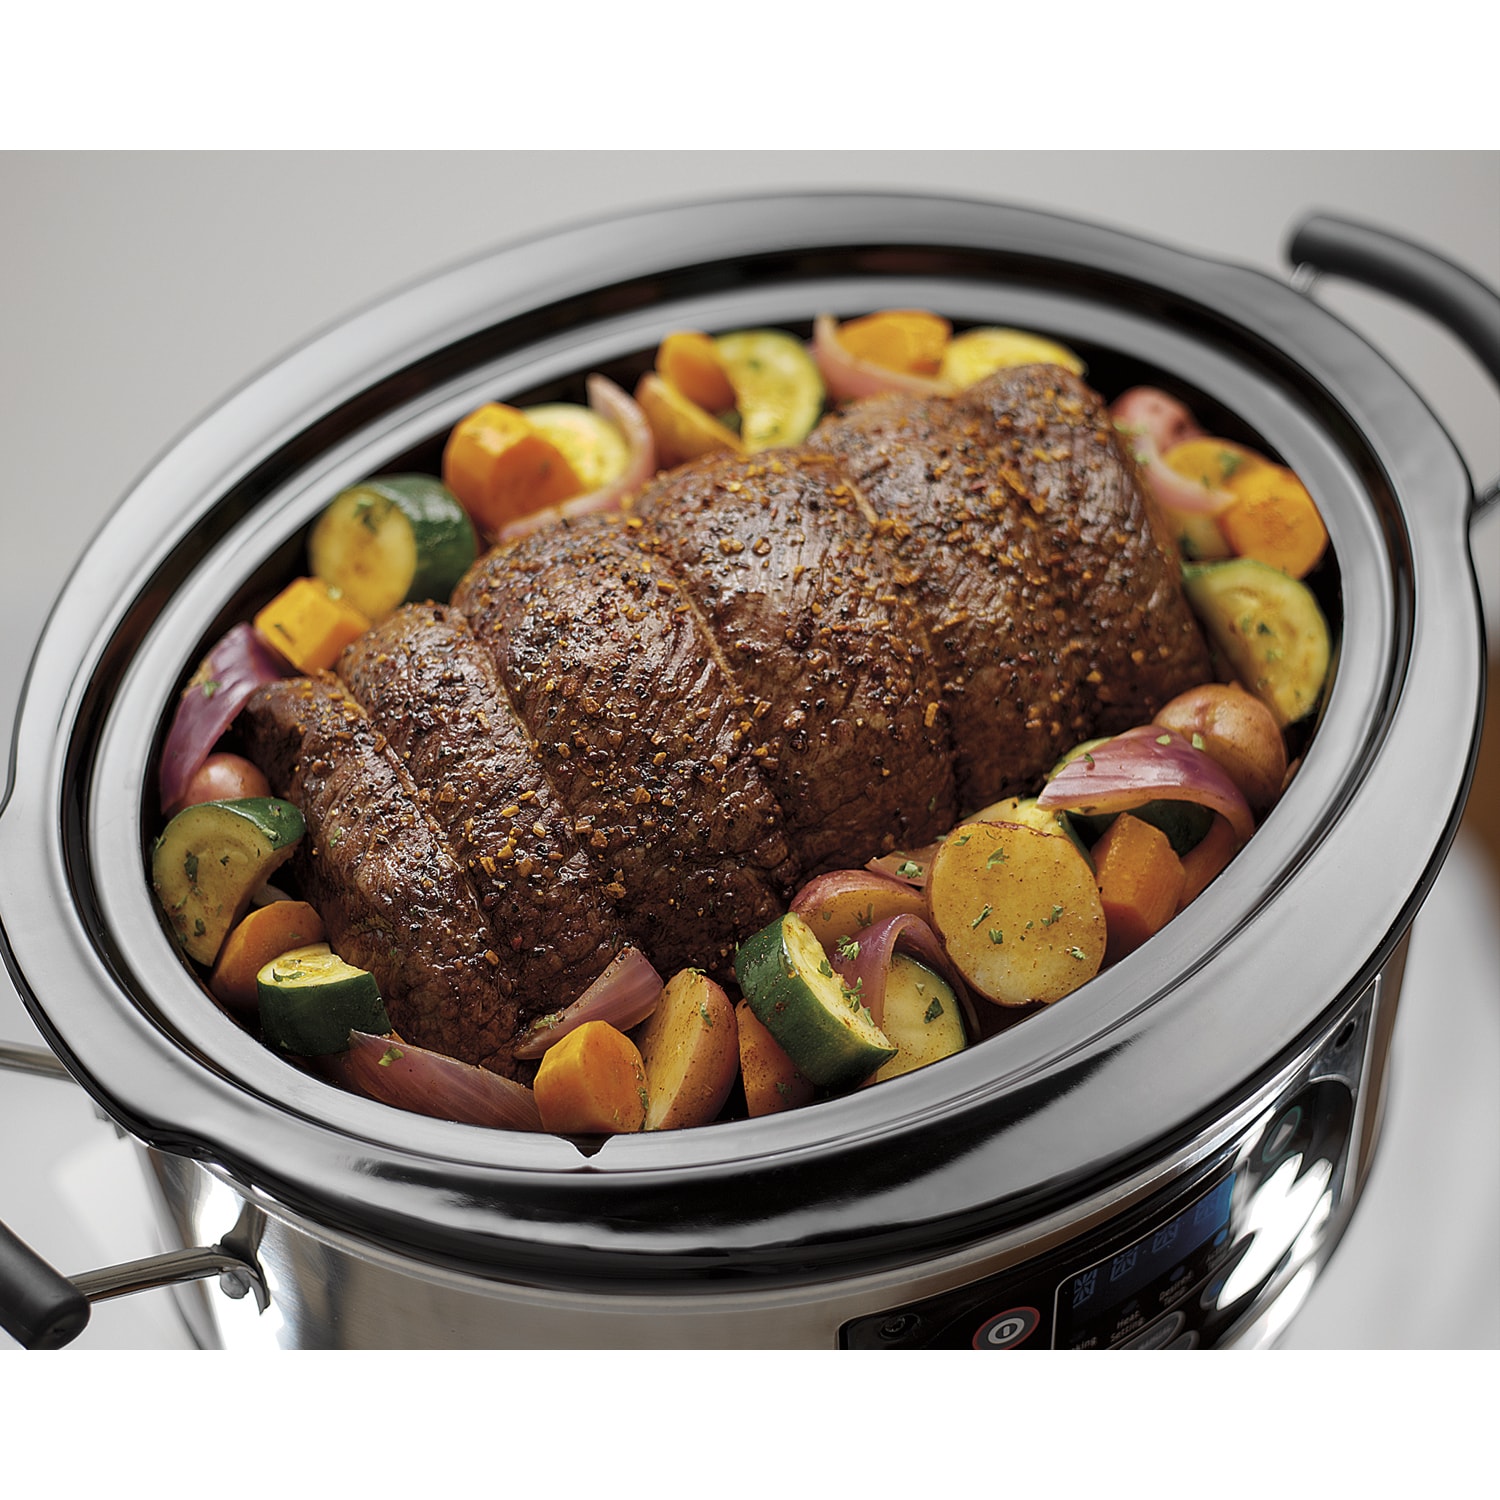 6 qt Stainless Steel Set & Forget Programmable Slow Cooker w/Spoon